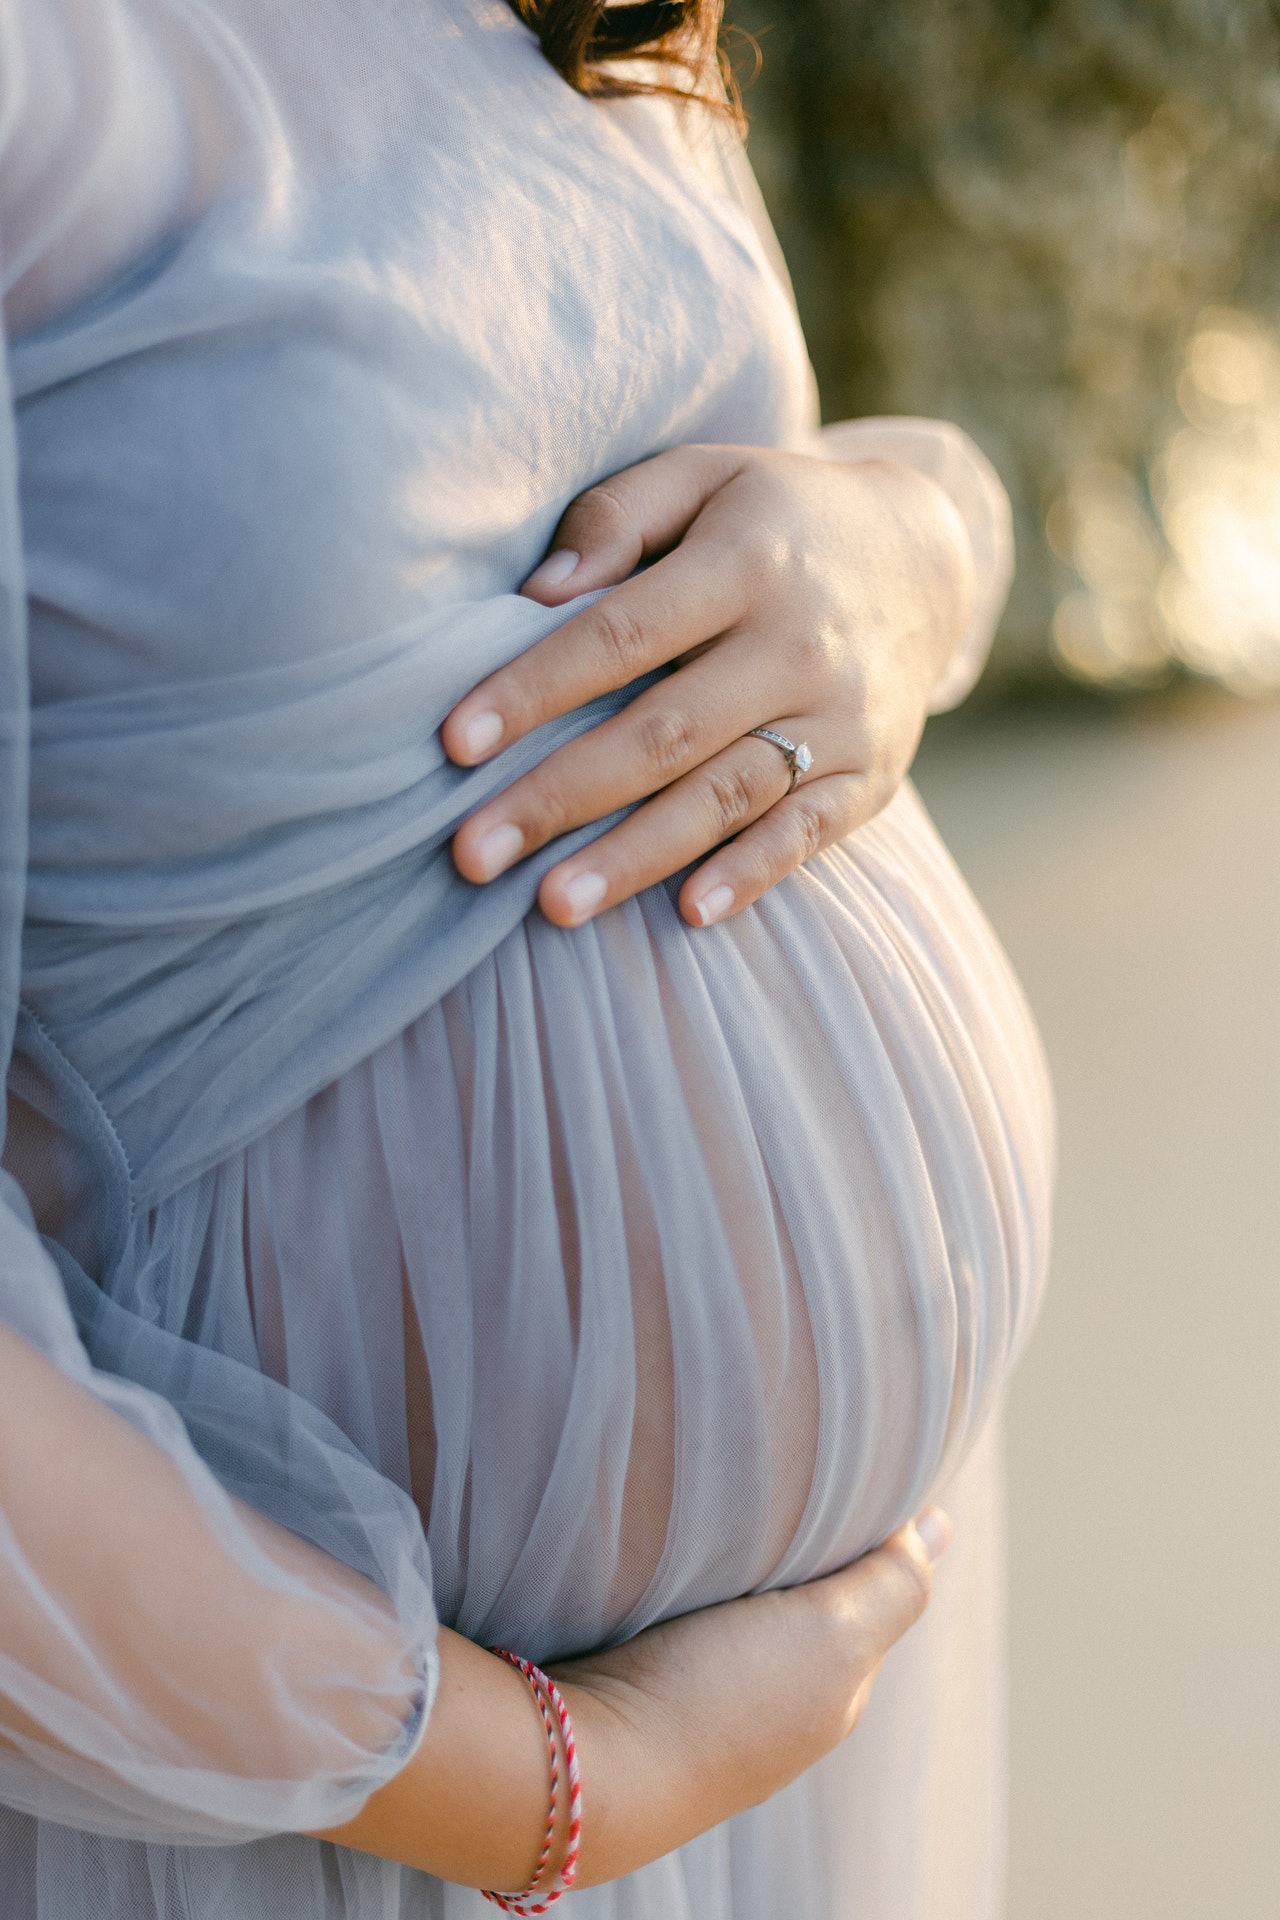 How Pregnancy Affects Your Dental Appointments